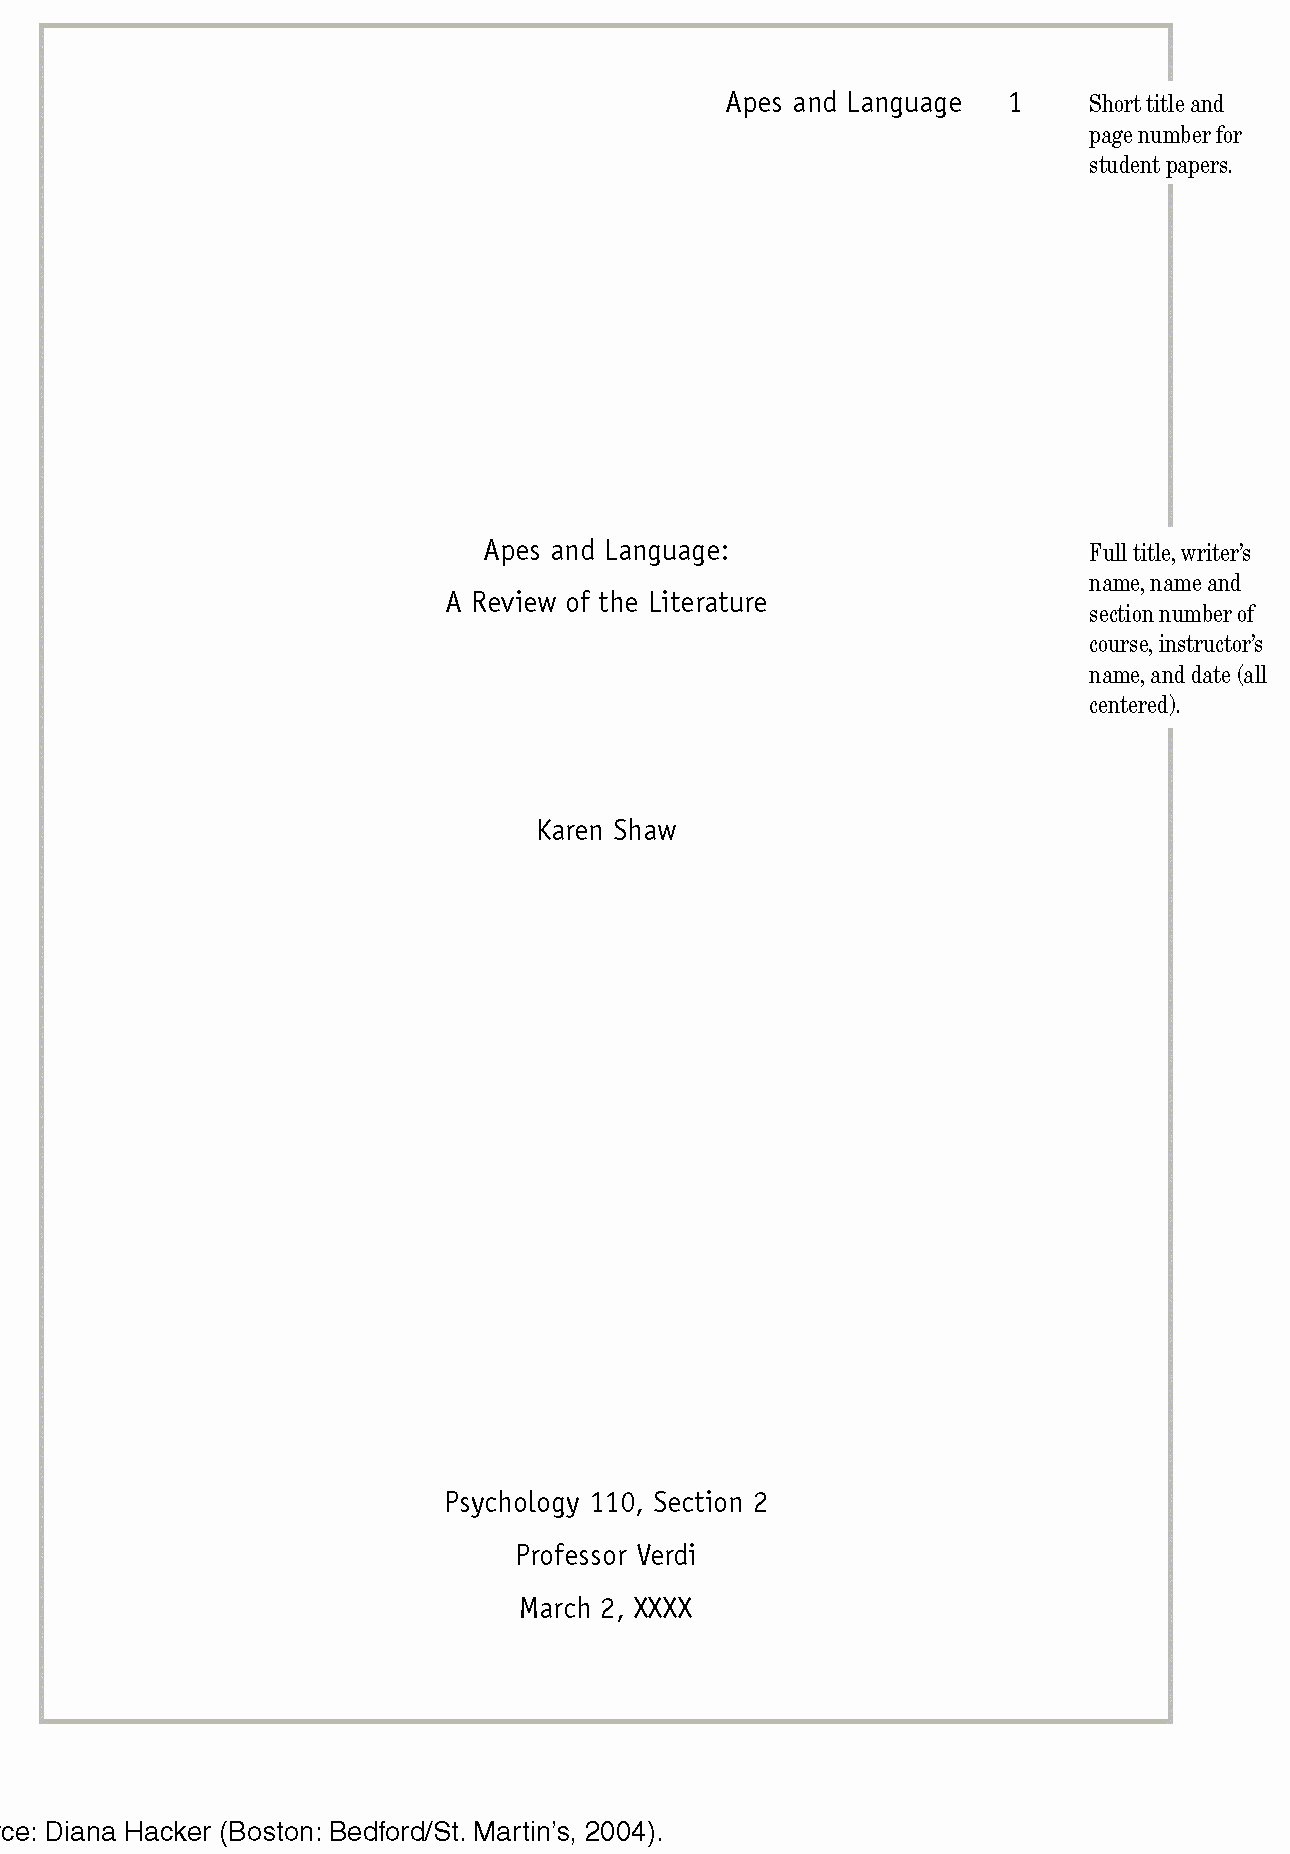 Sample Title Page Apa Style Best Of How to format Essays Ocean County College